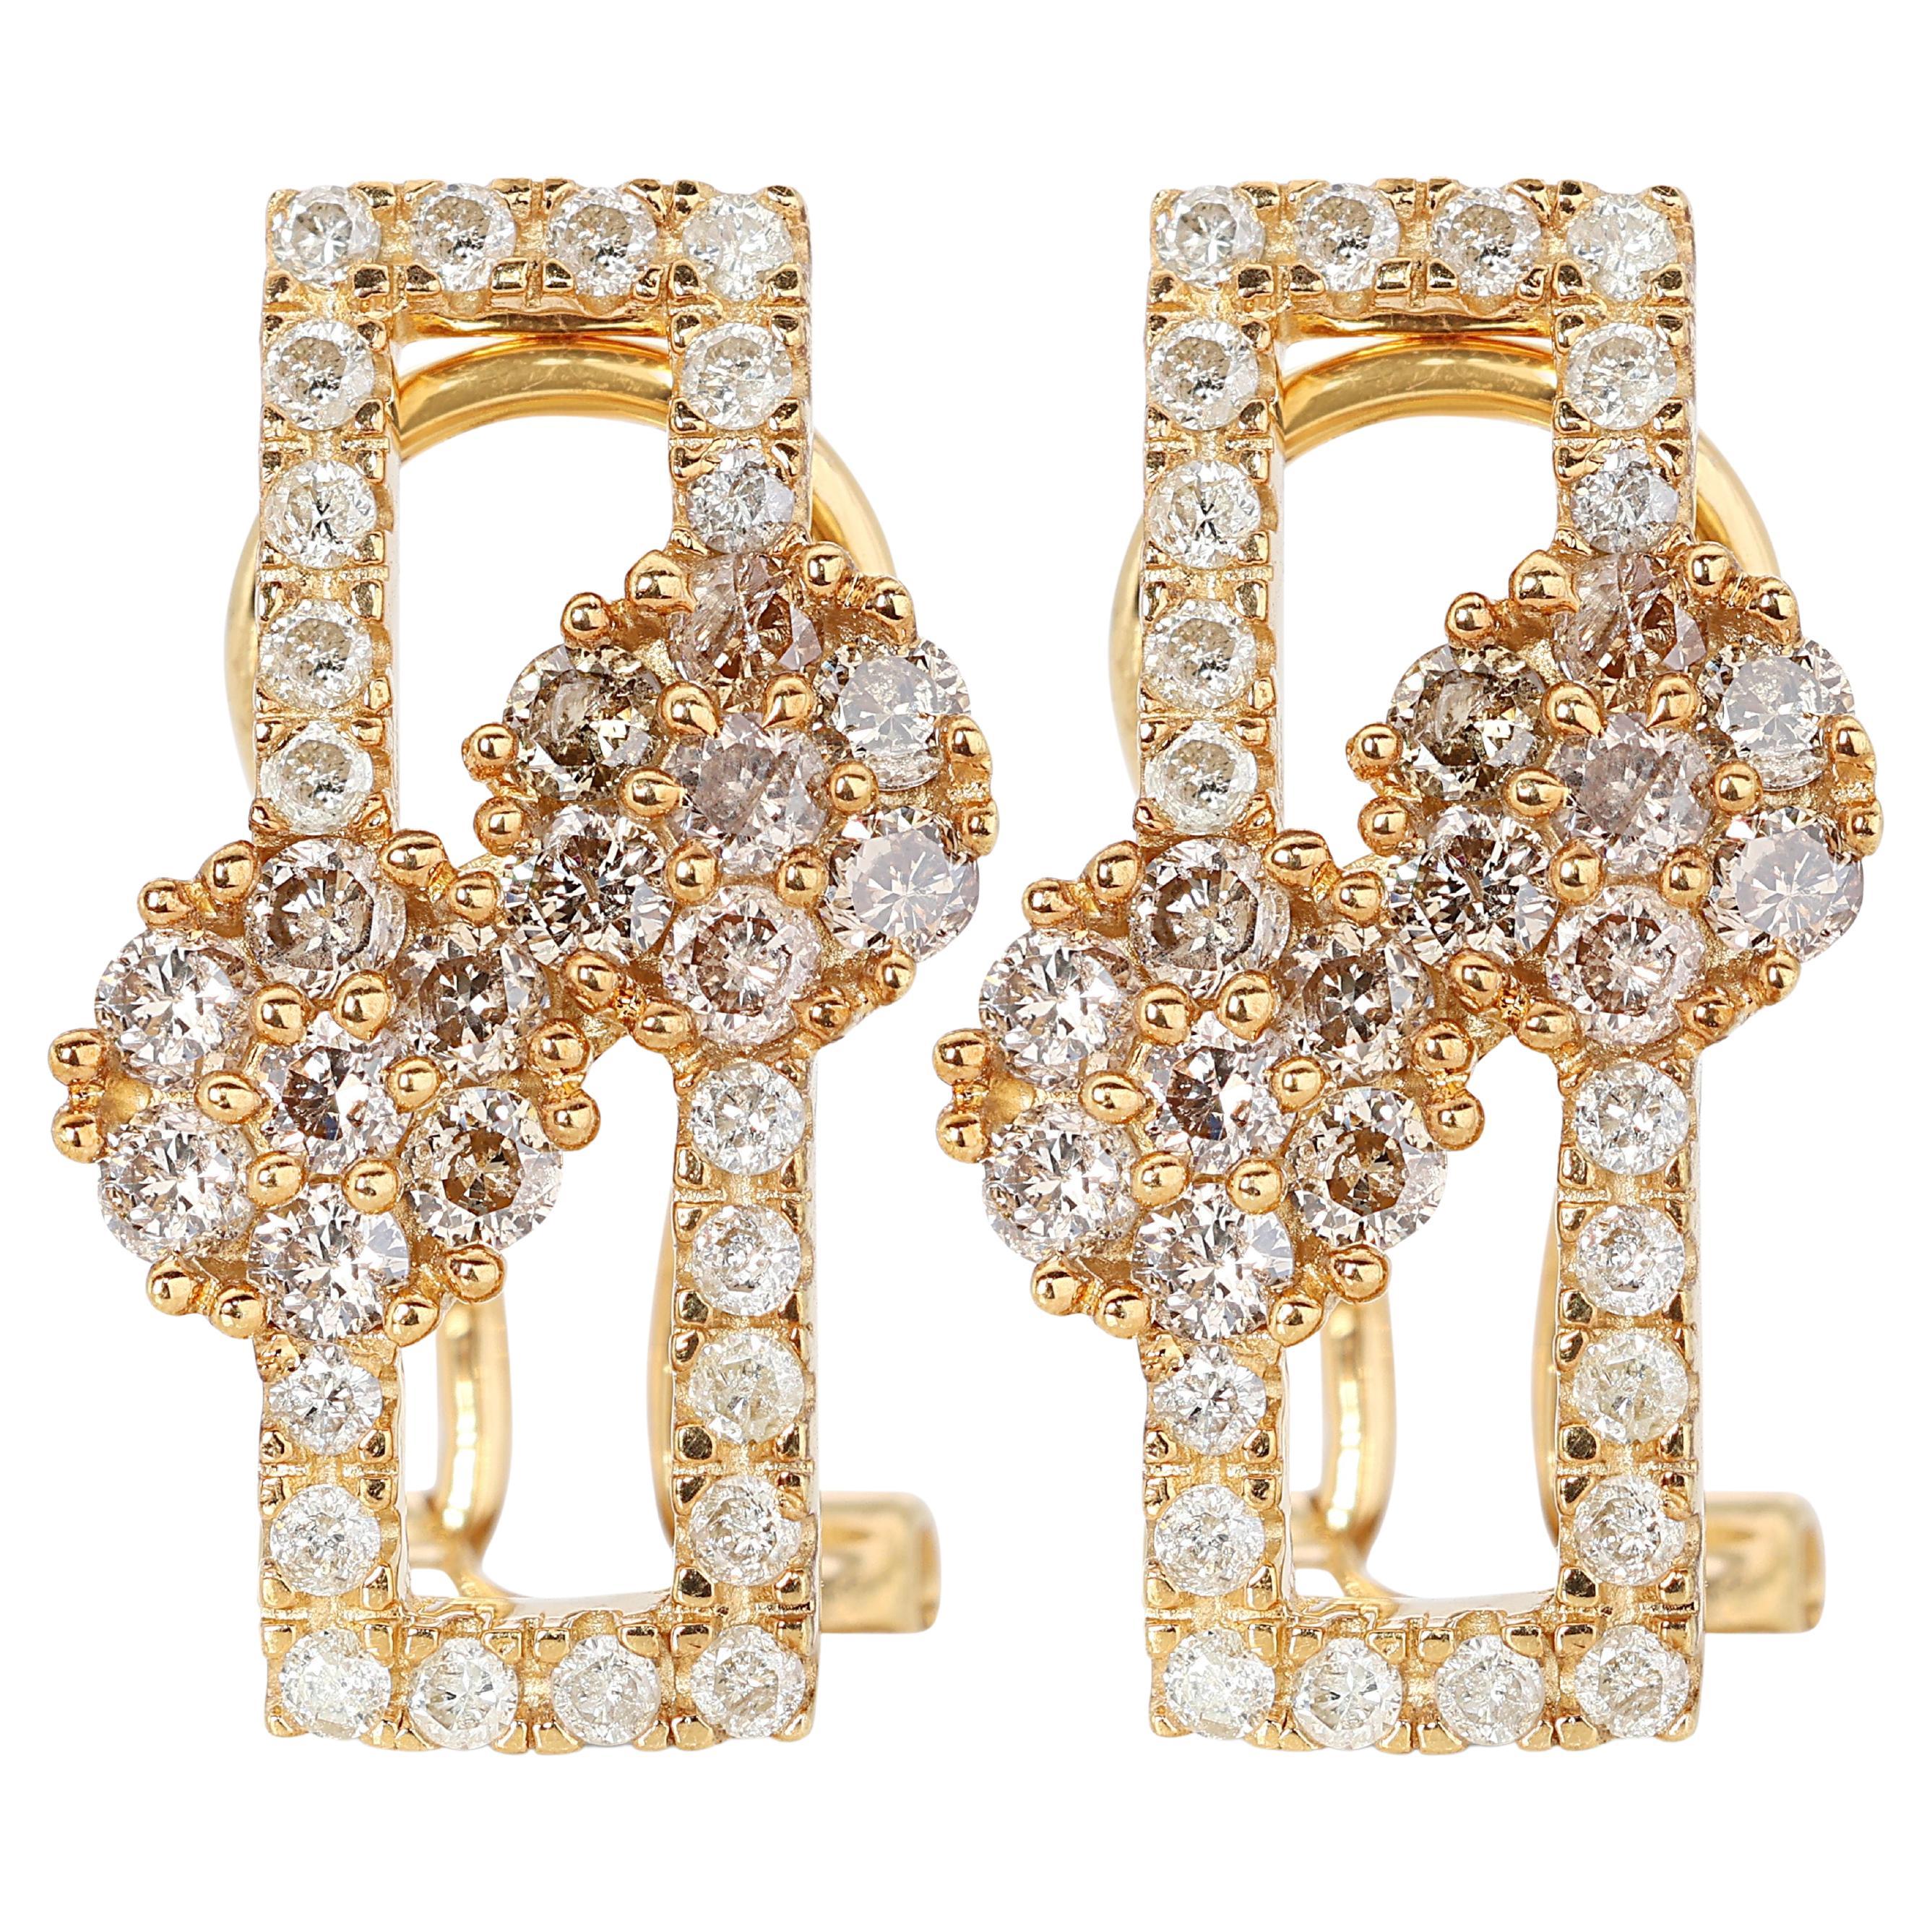 18K Yellow Gold Lever Back Earrings with 1.52ct Natural Diamonds